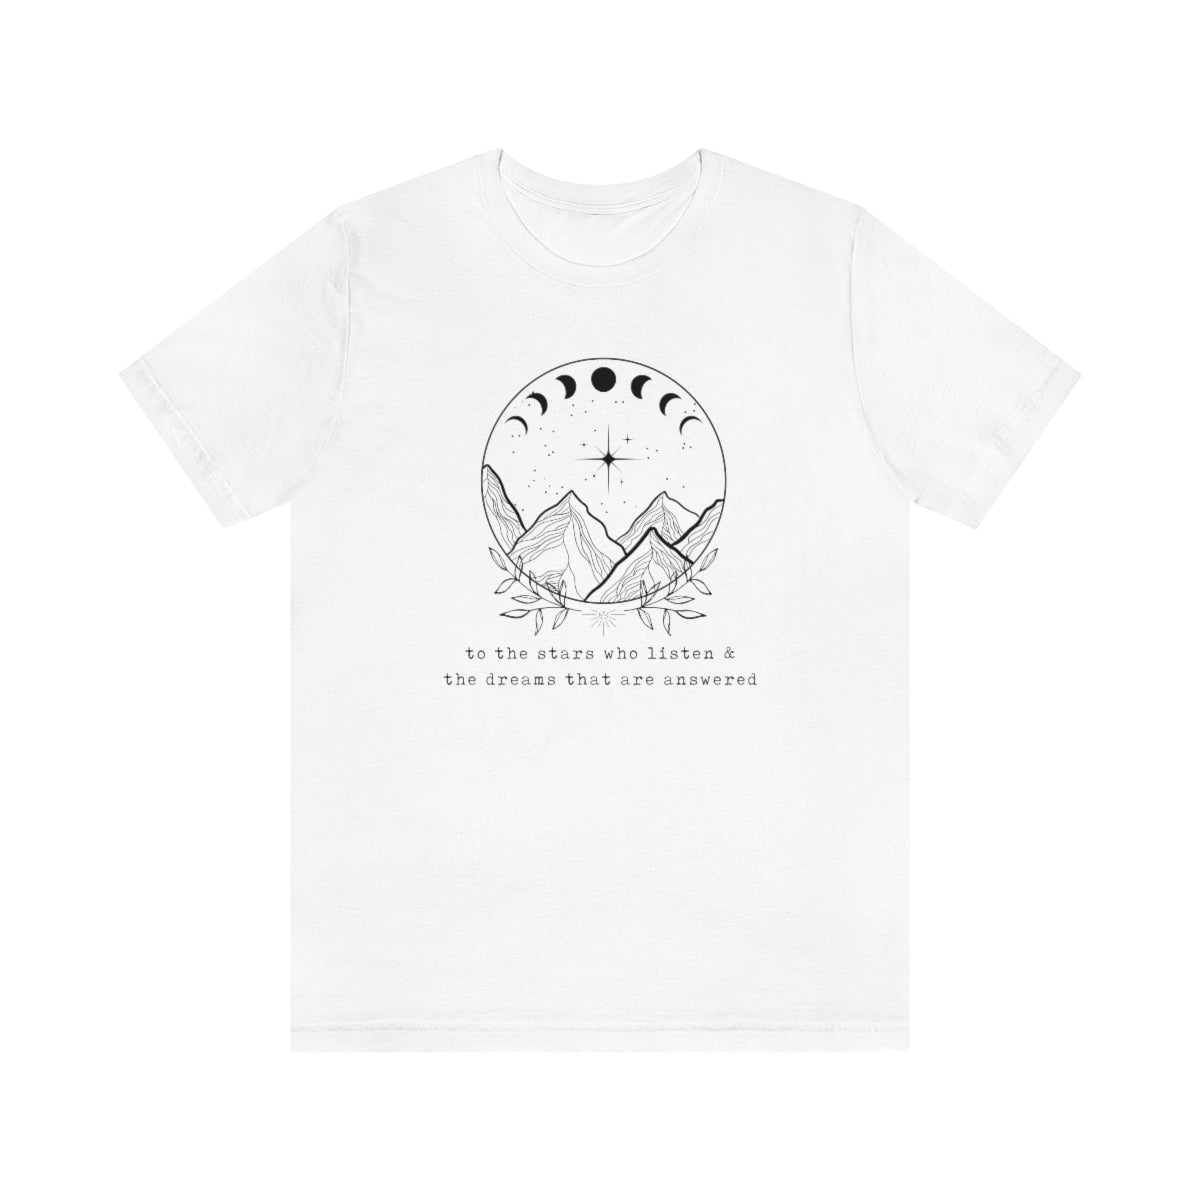 ACOTAR for the dreamers Tee